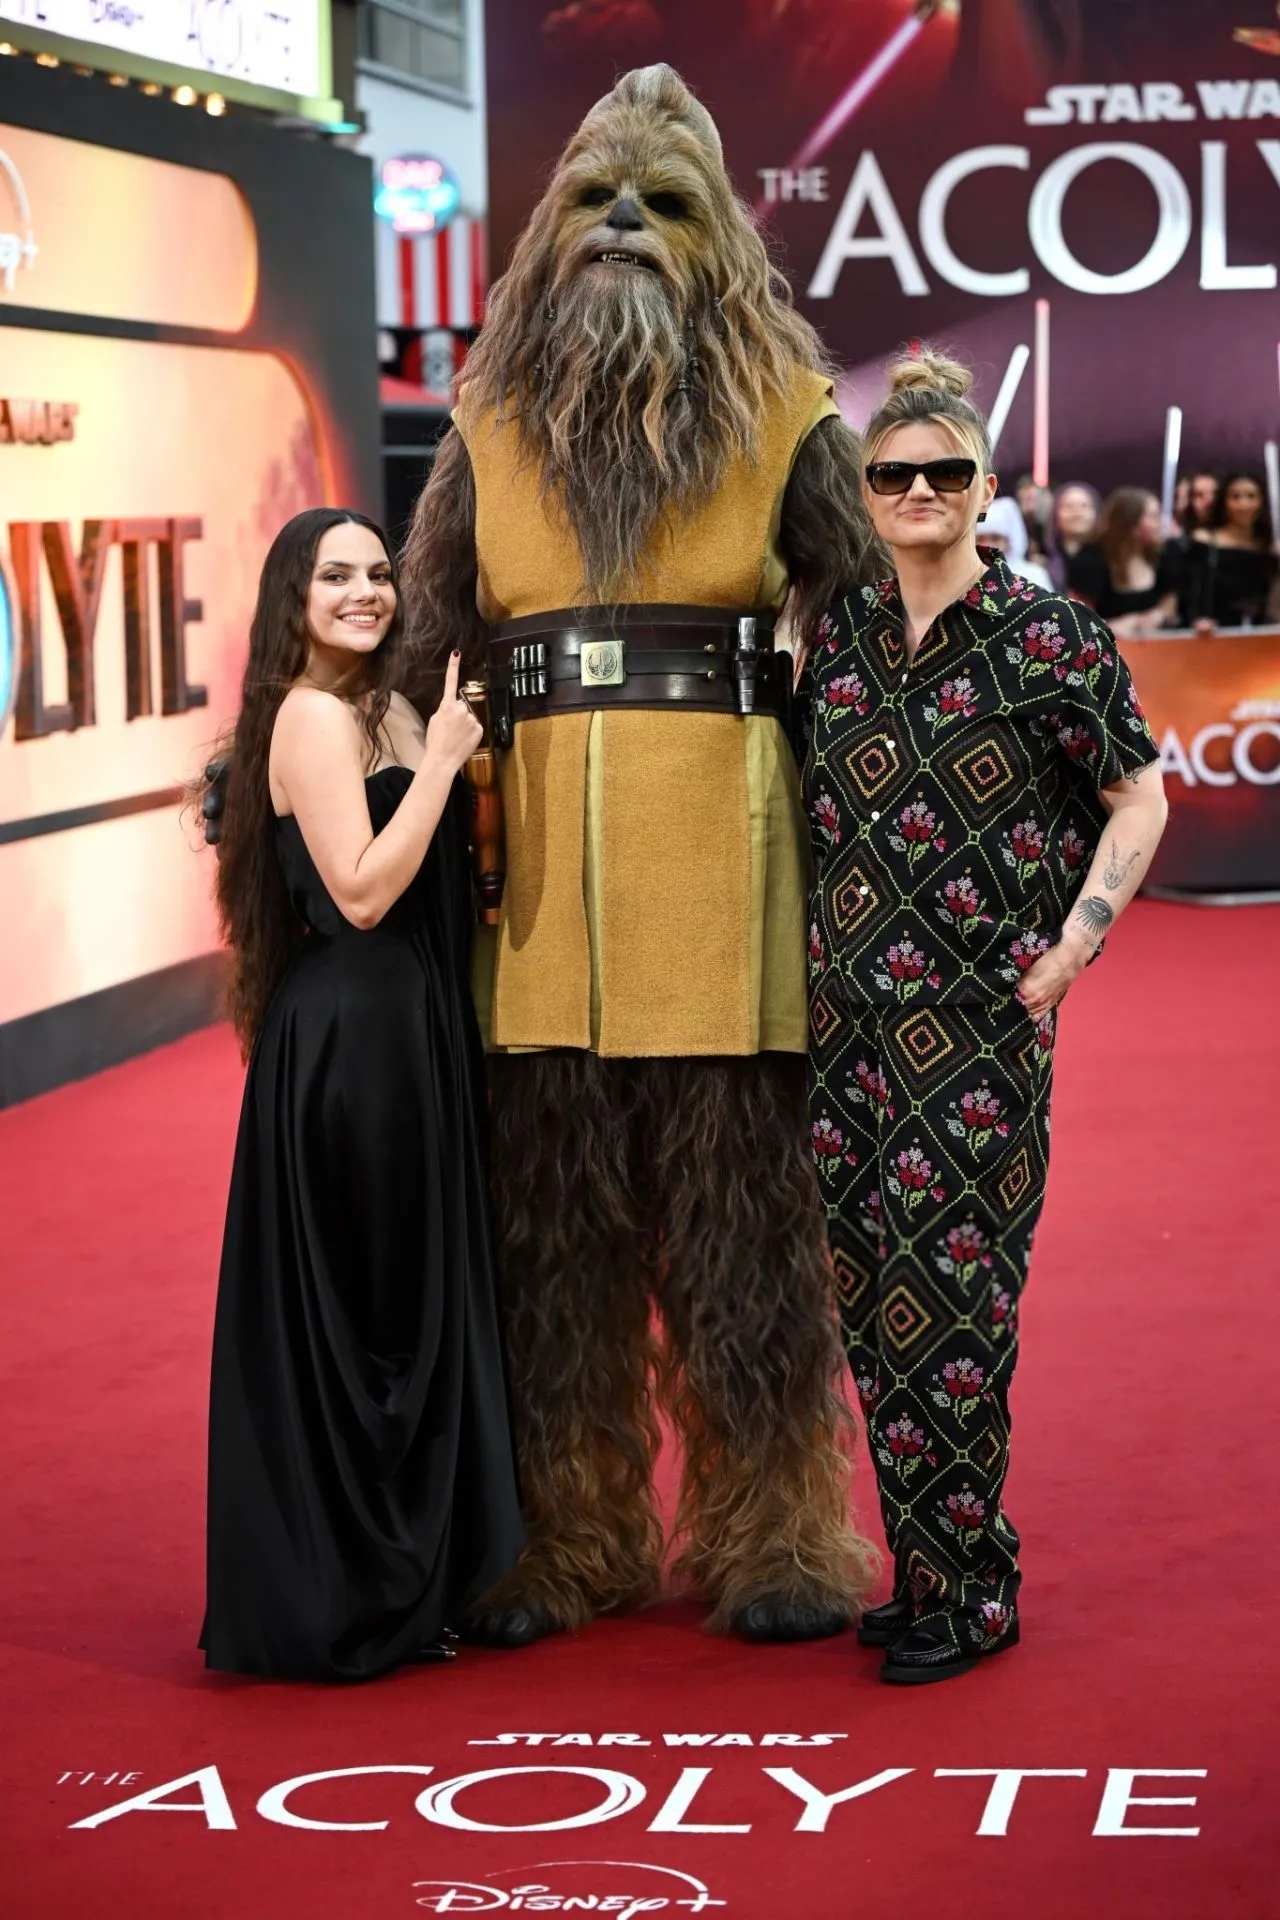 DAFNE KEEN AT STAR WARS THE ACOLYTE PREMIERE IN LONDON11